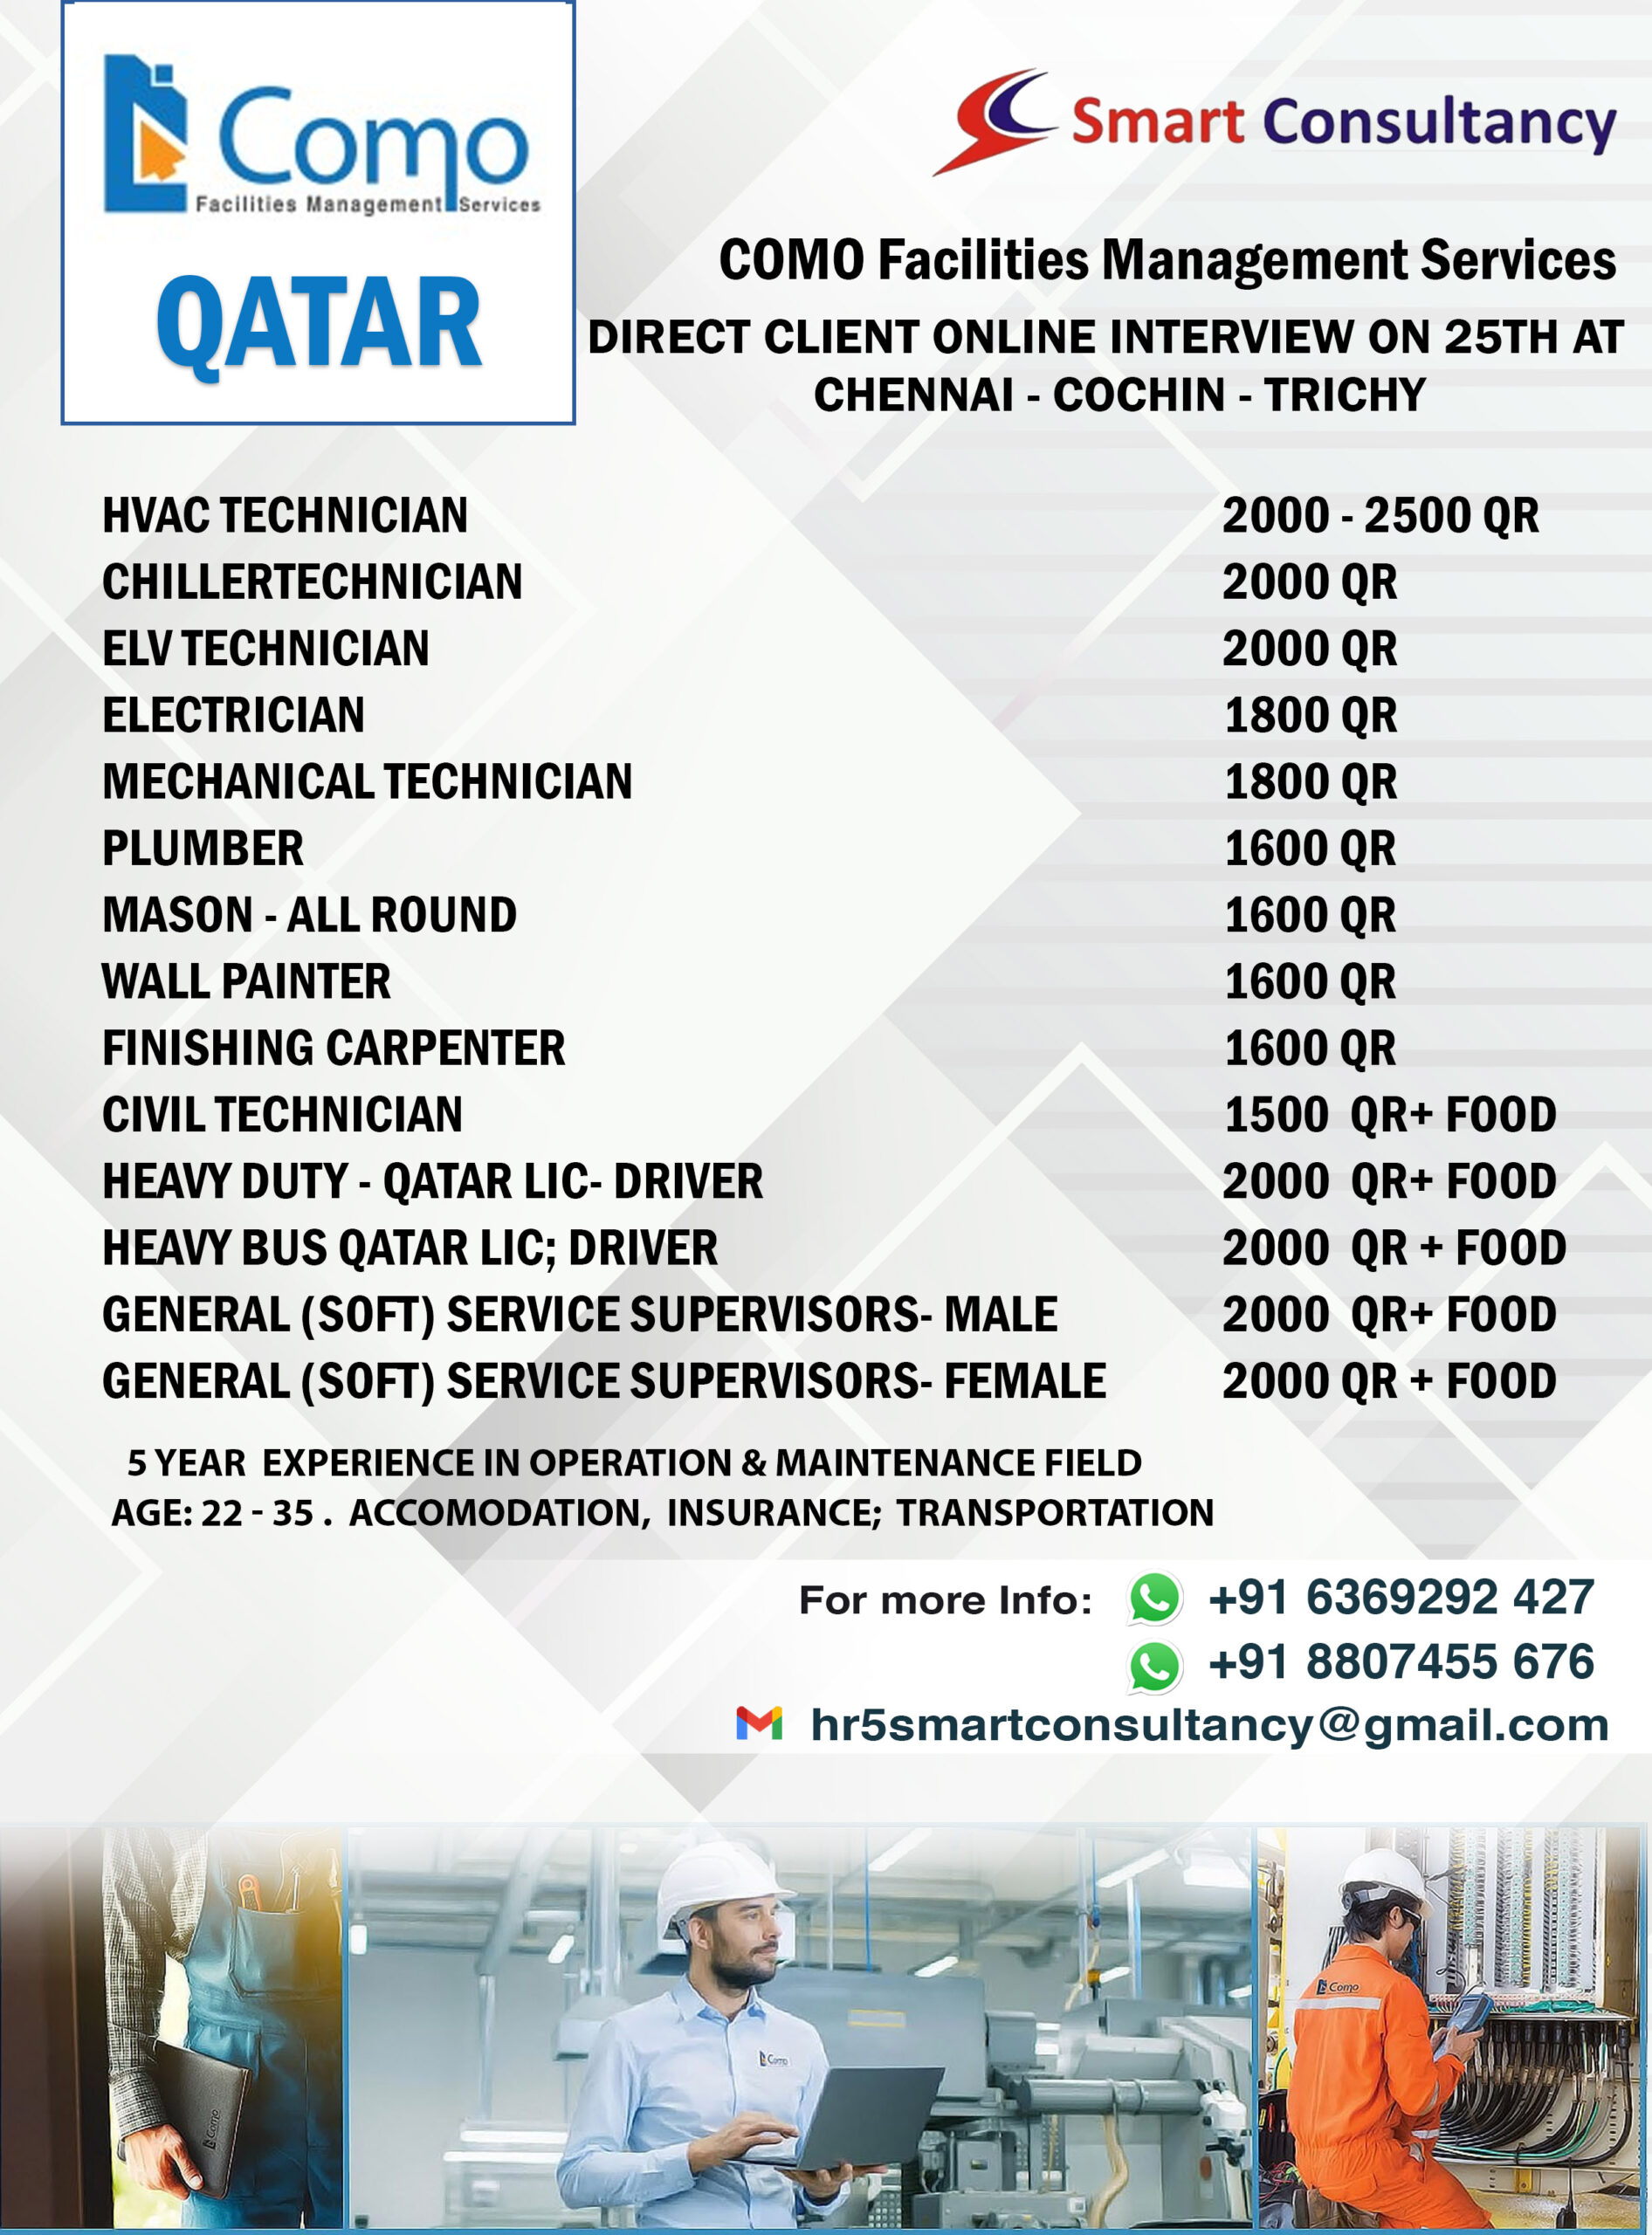 Wanted for Qatar COMO Facilities Management Services DIRECT CLIENT ONLINE INTERVIEW on 25TH AT CHENNAI – COCHIN – TRICHY